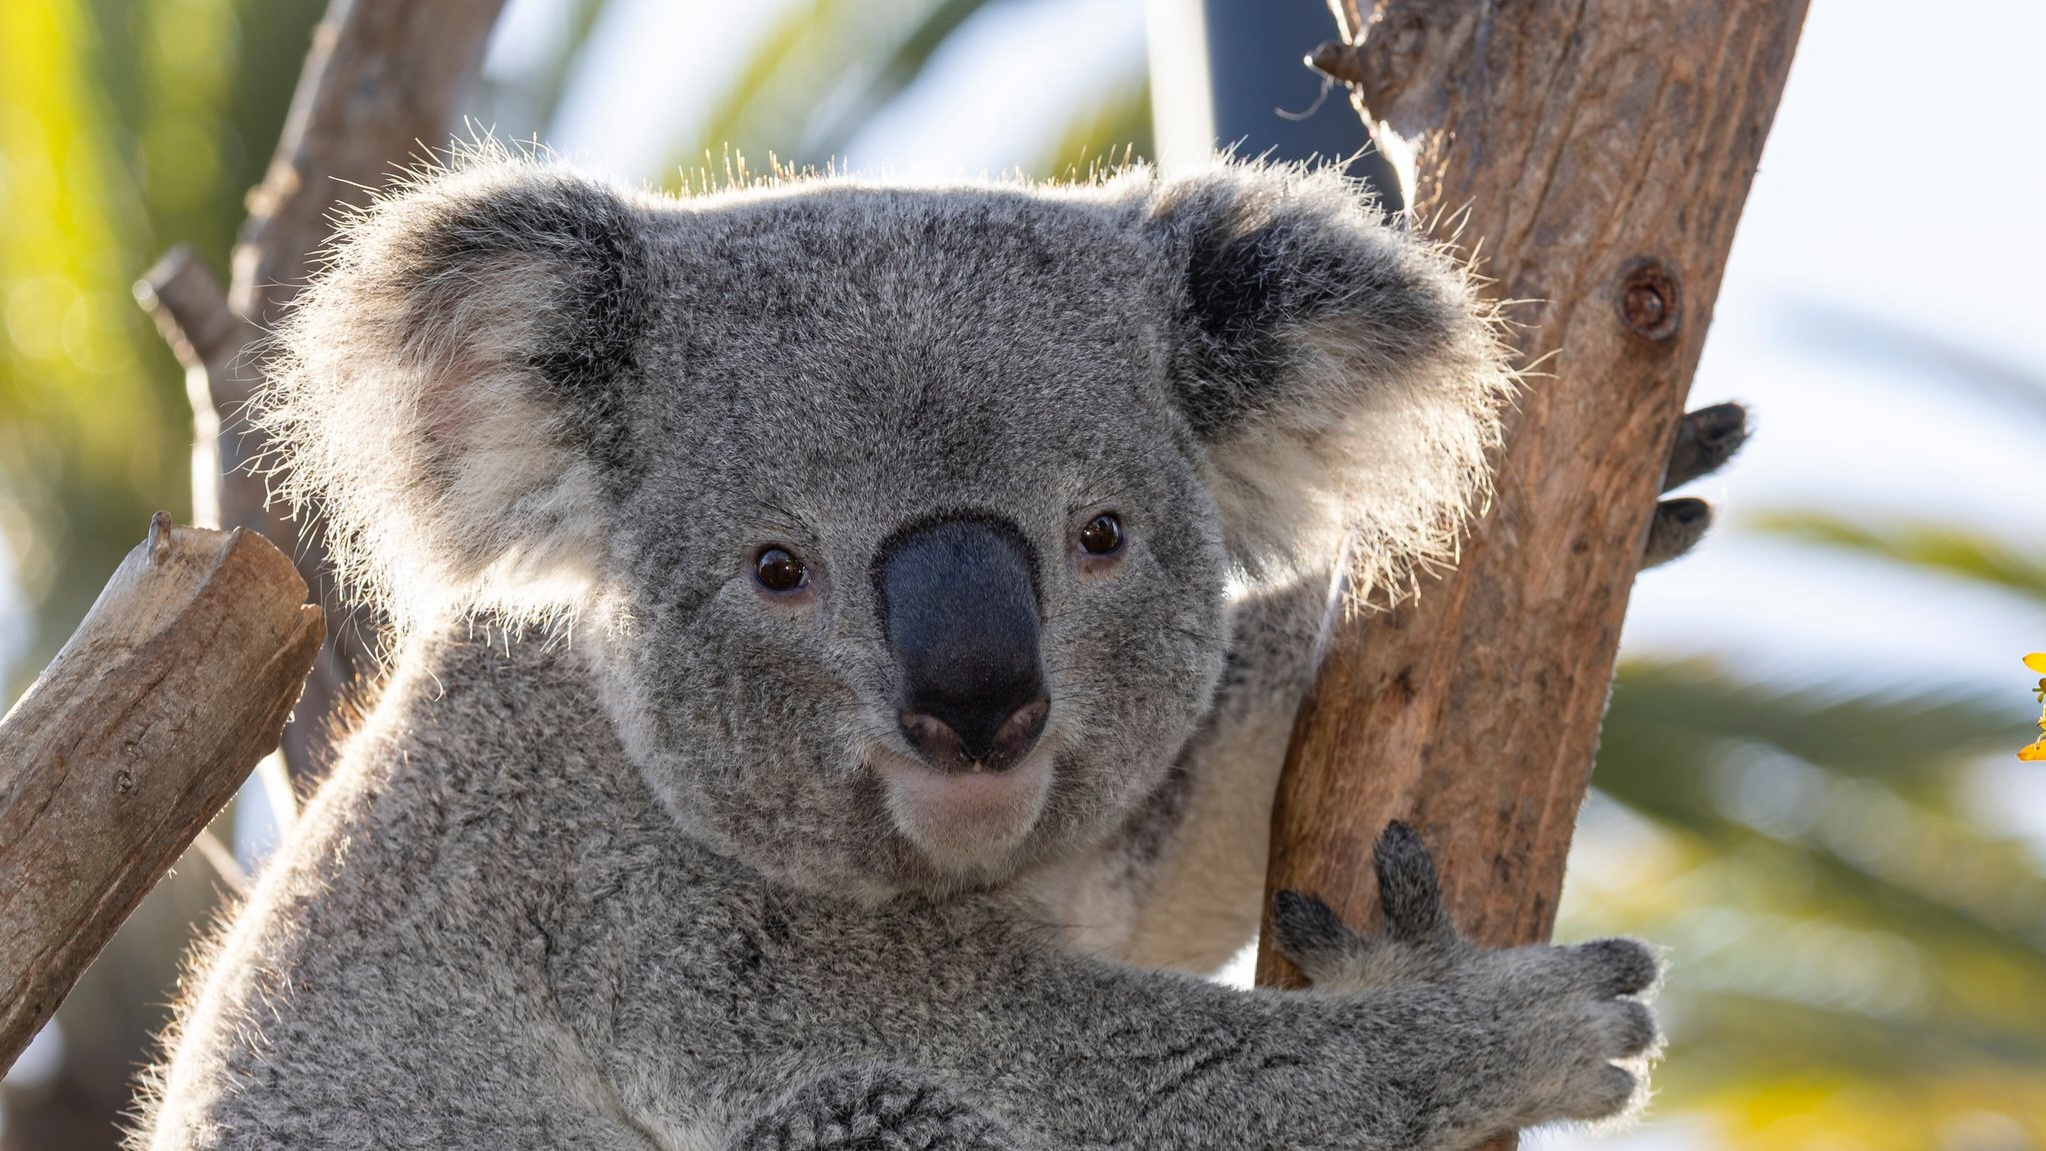 Brookfield Zoo to debut koalas for the first time in it’s 90-year history